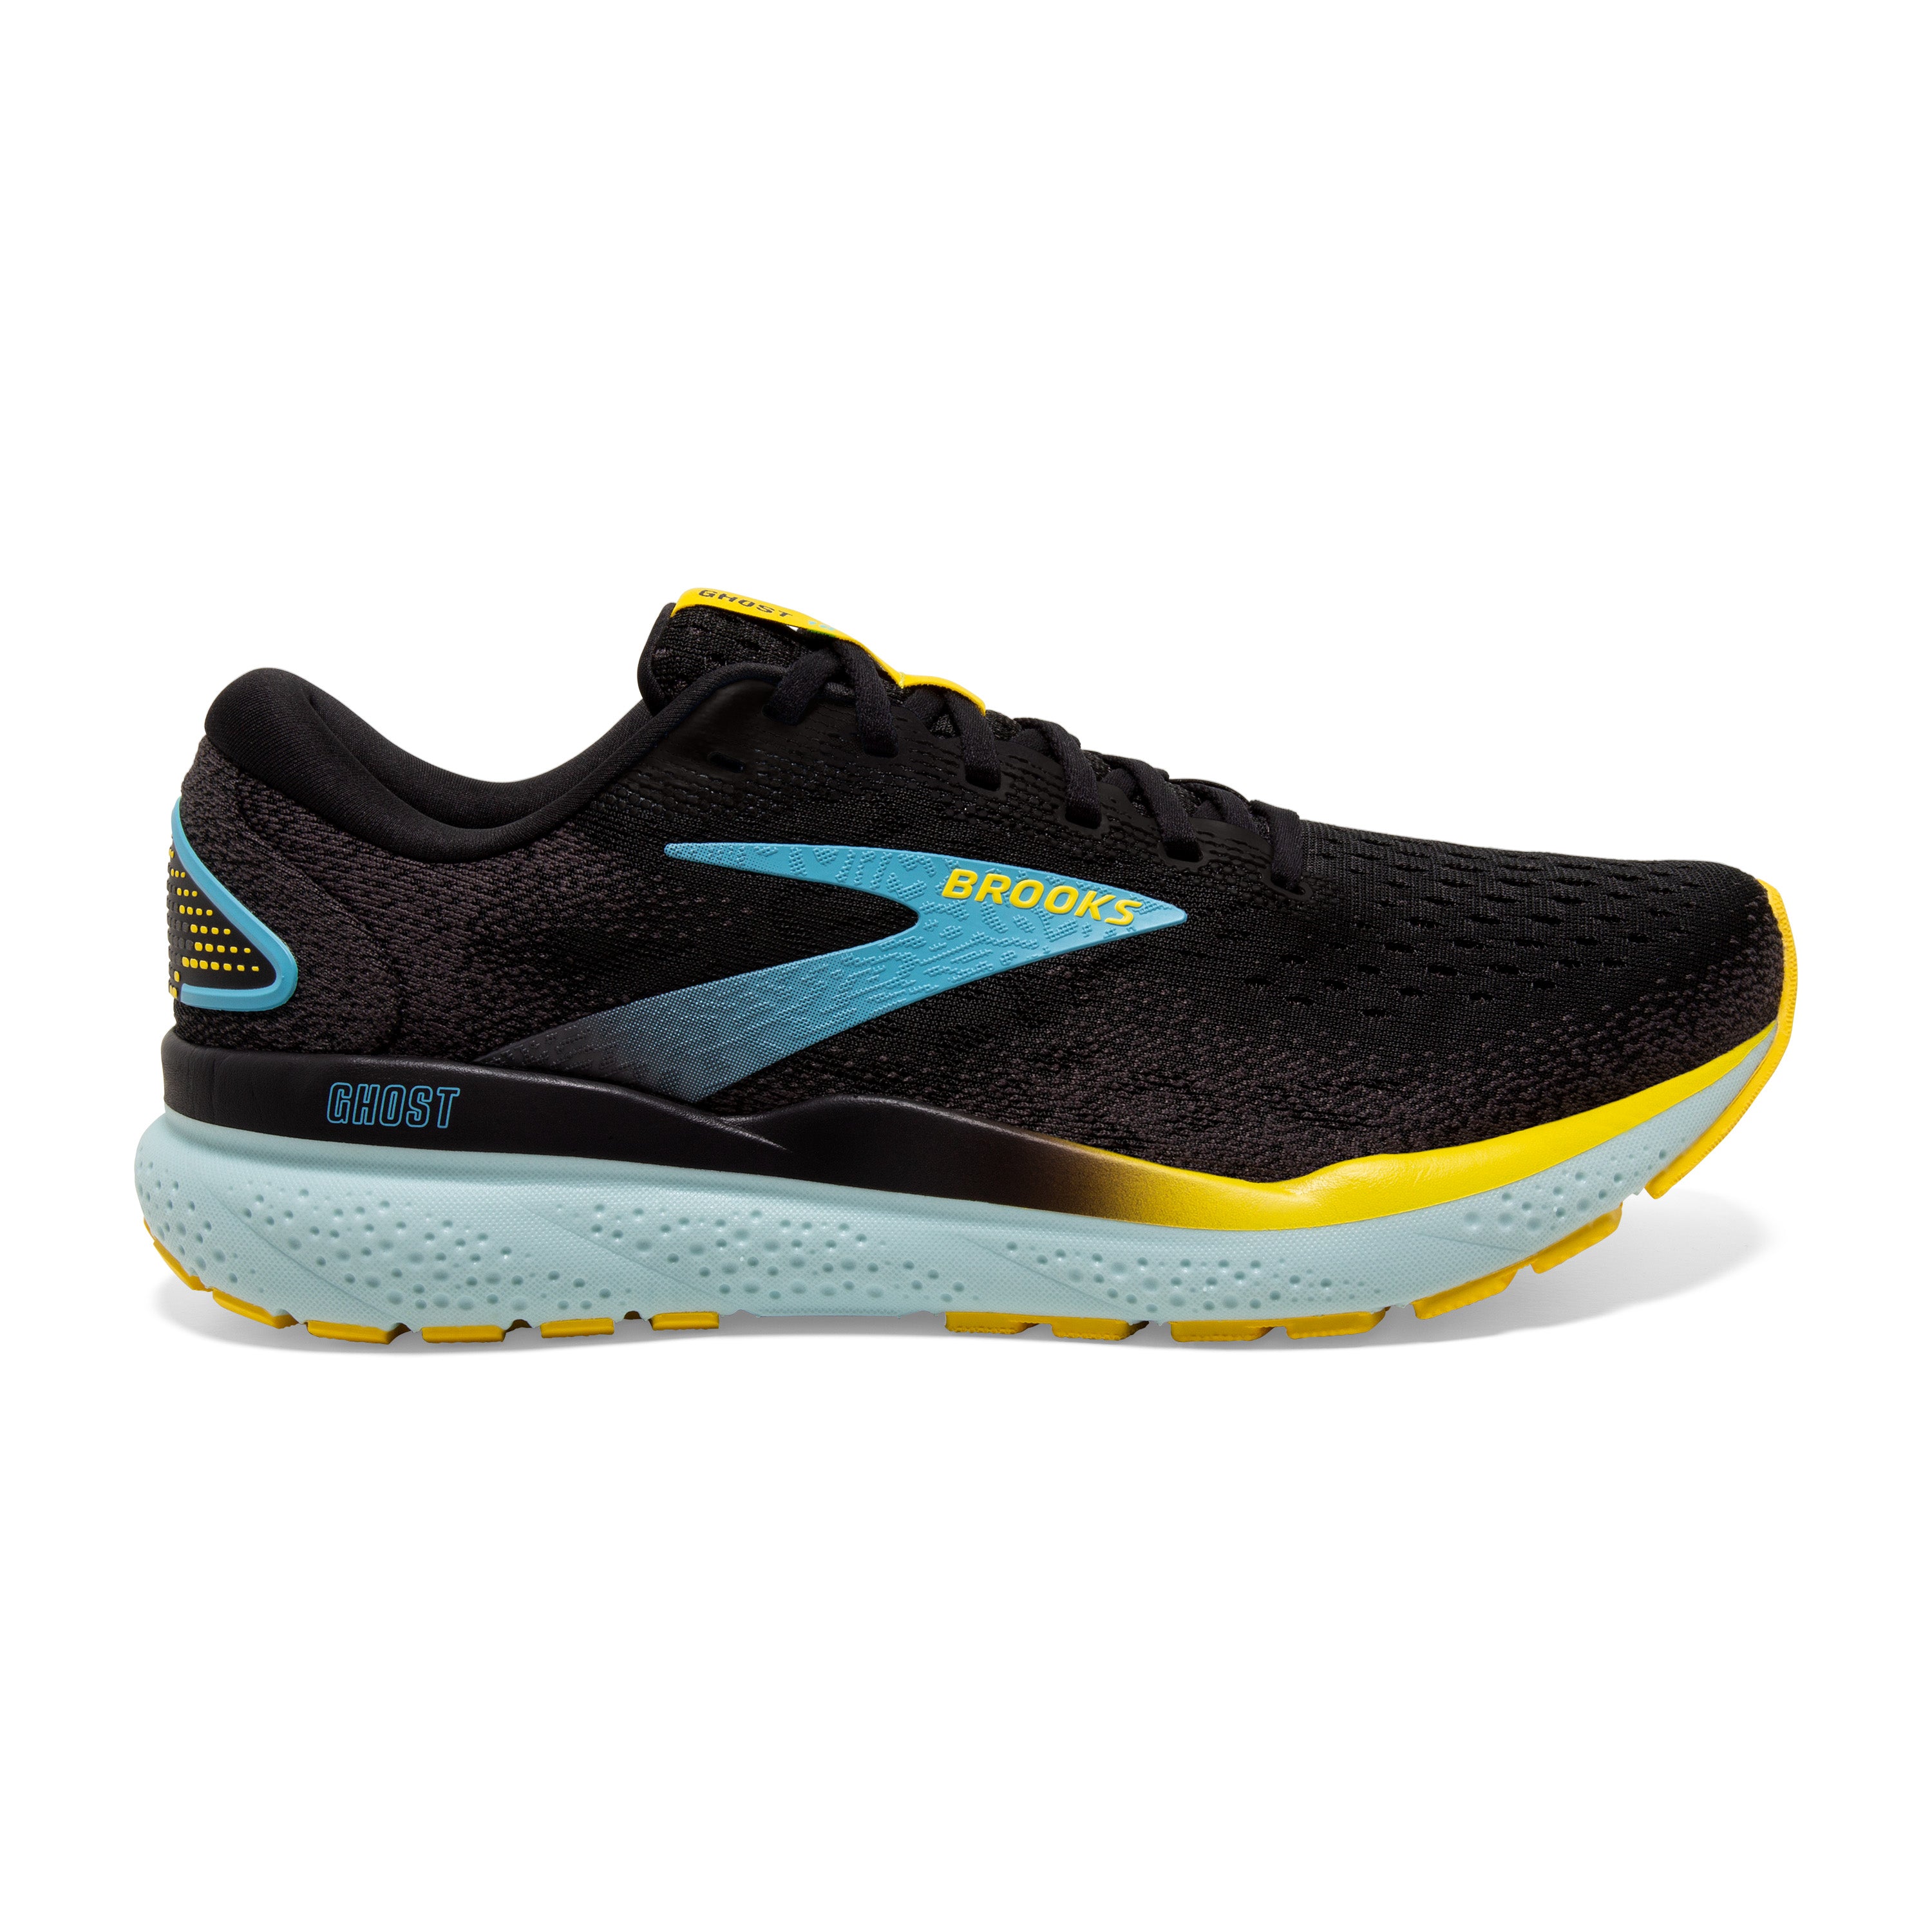 BROOKS MEN'S GHOST 16 - D - 029 BLACK/FORGED IRON/BLUE 7.0